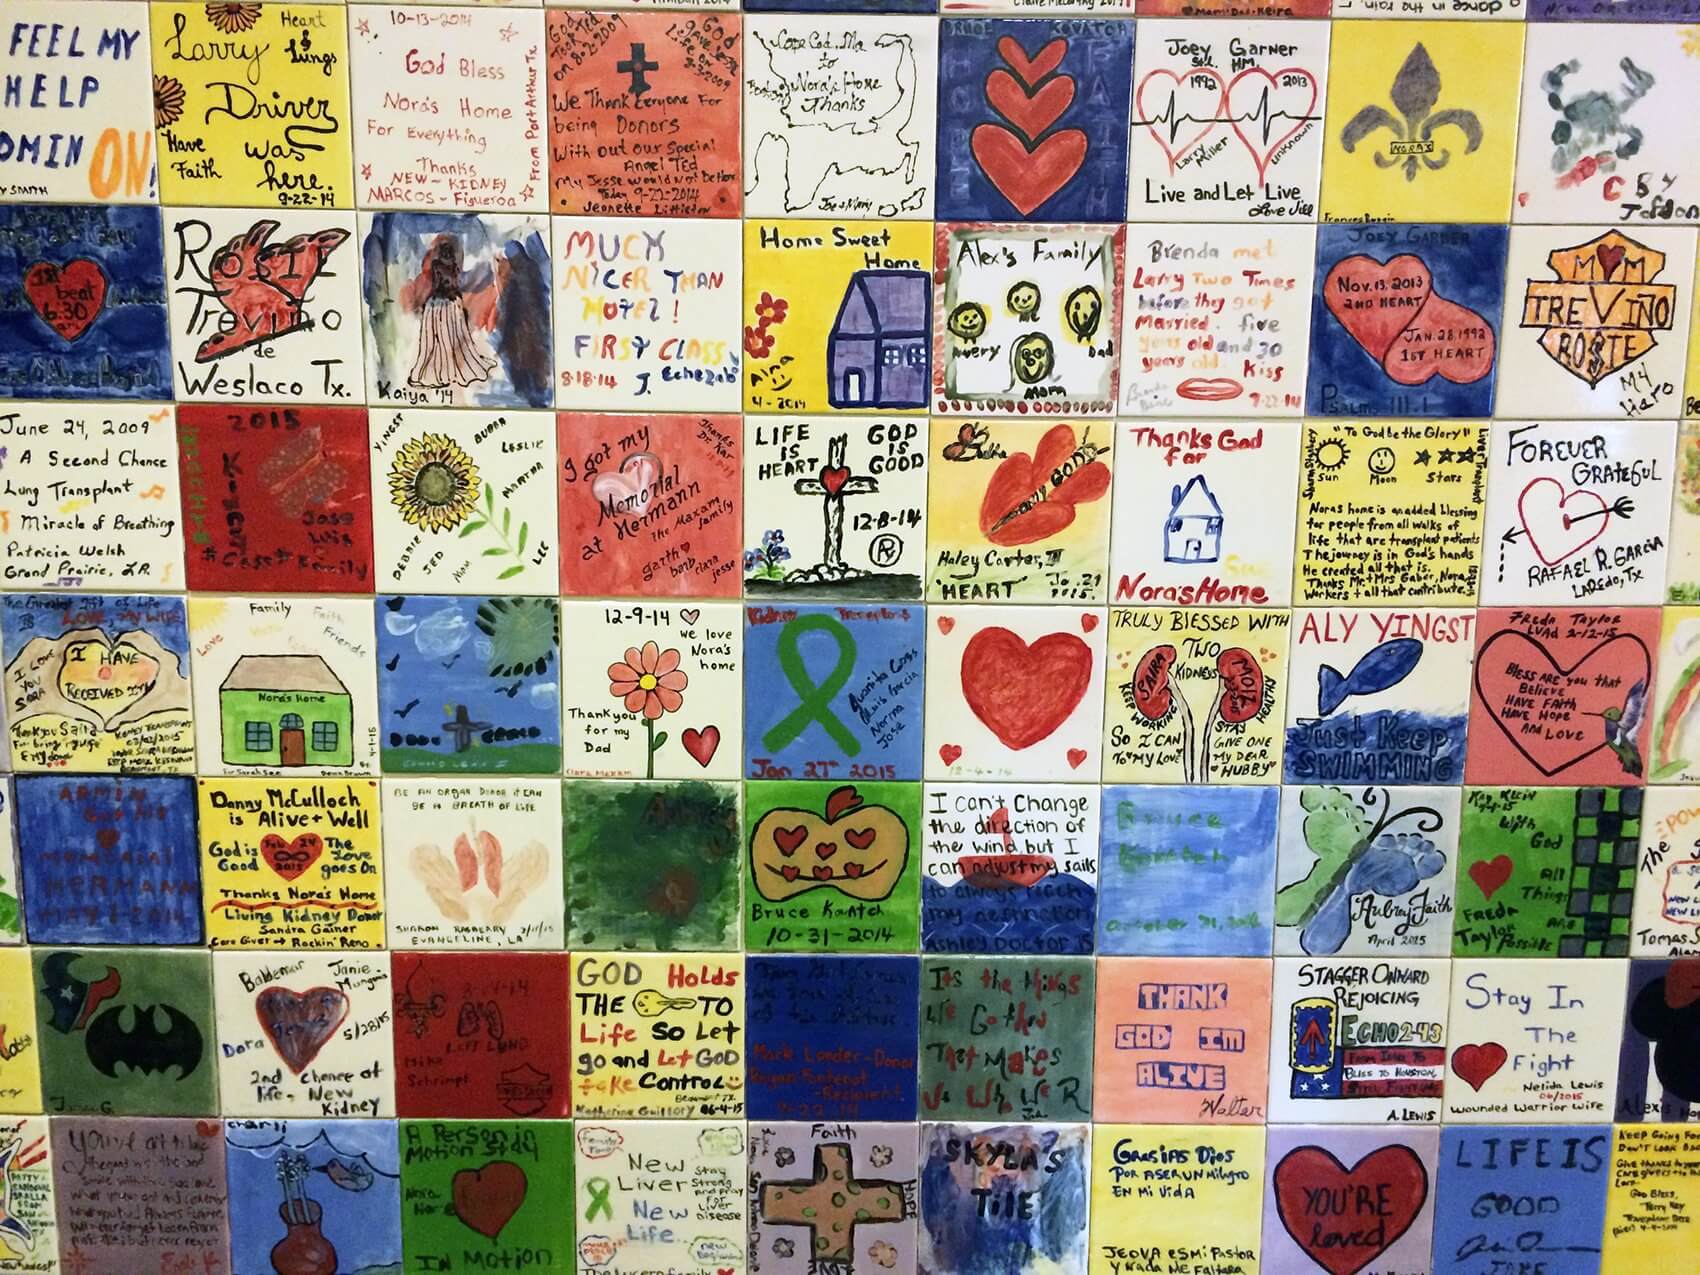 Nora's Home staff hopes the tile wall will continue to grow and brighten the halls of Nora's Home.